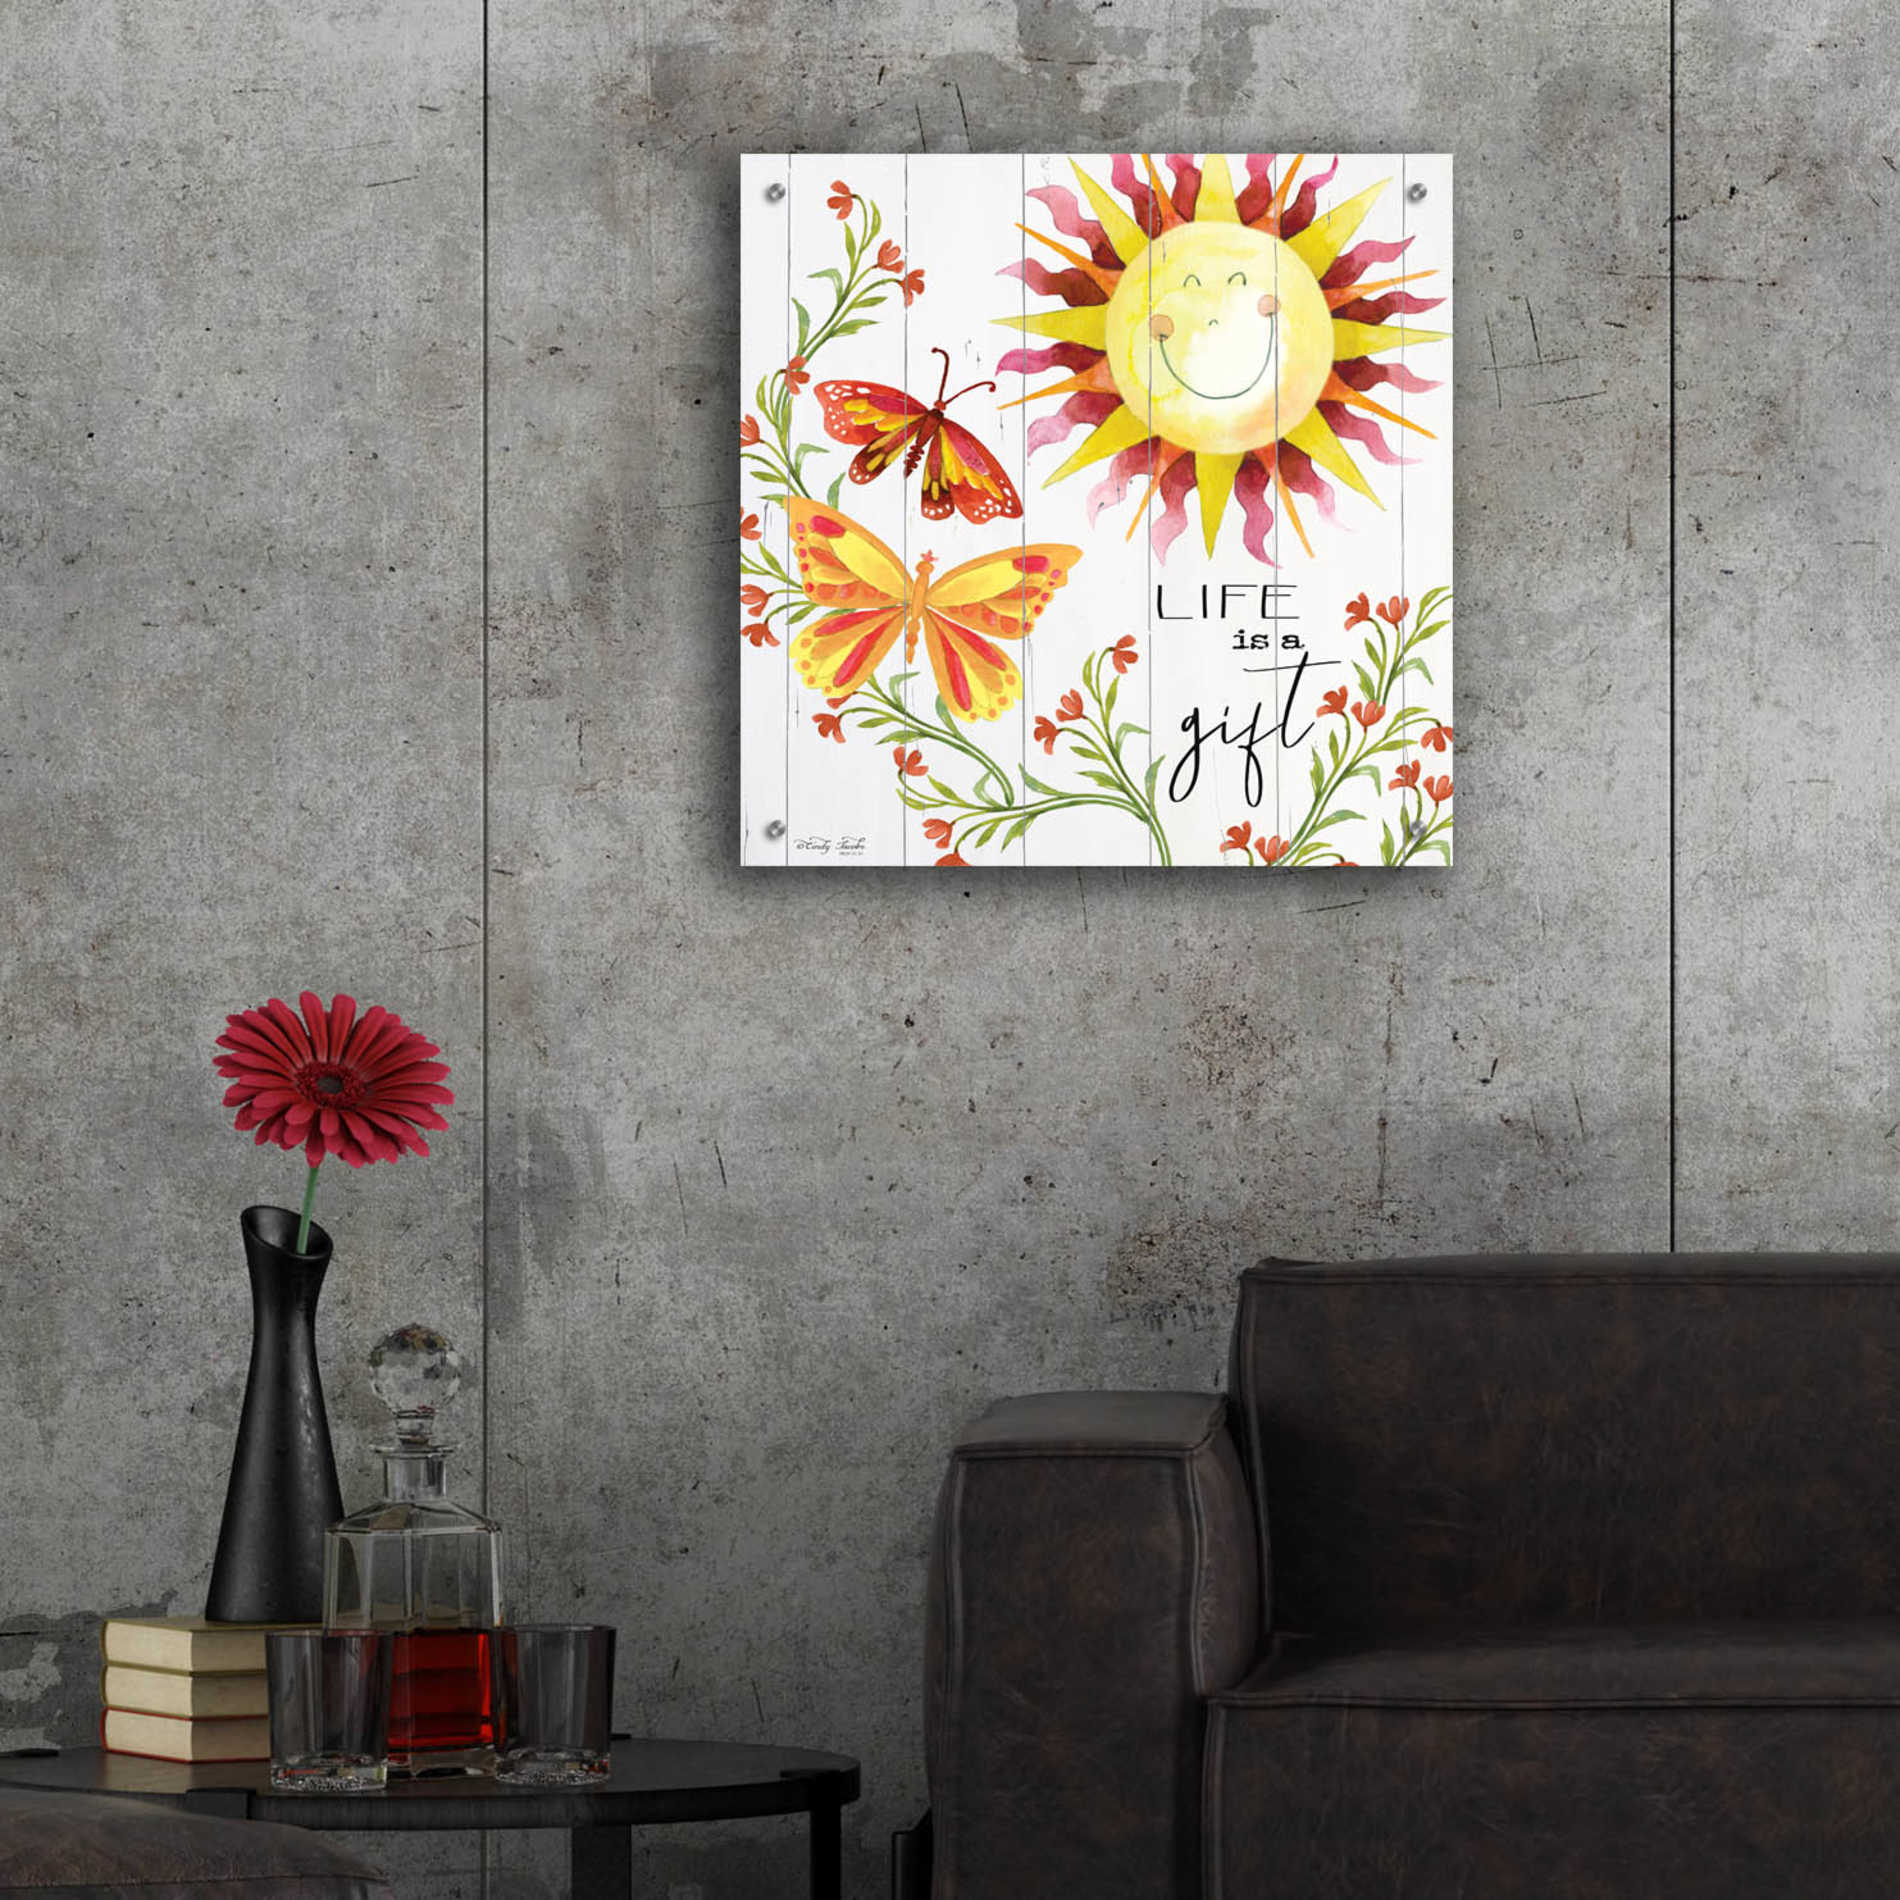 Epic Art 'Life is a Gift' by Cindy Jacobs, Acrylic Glass Wall Art,24x24